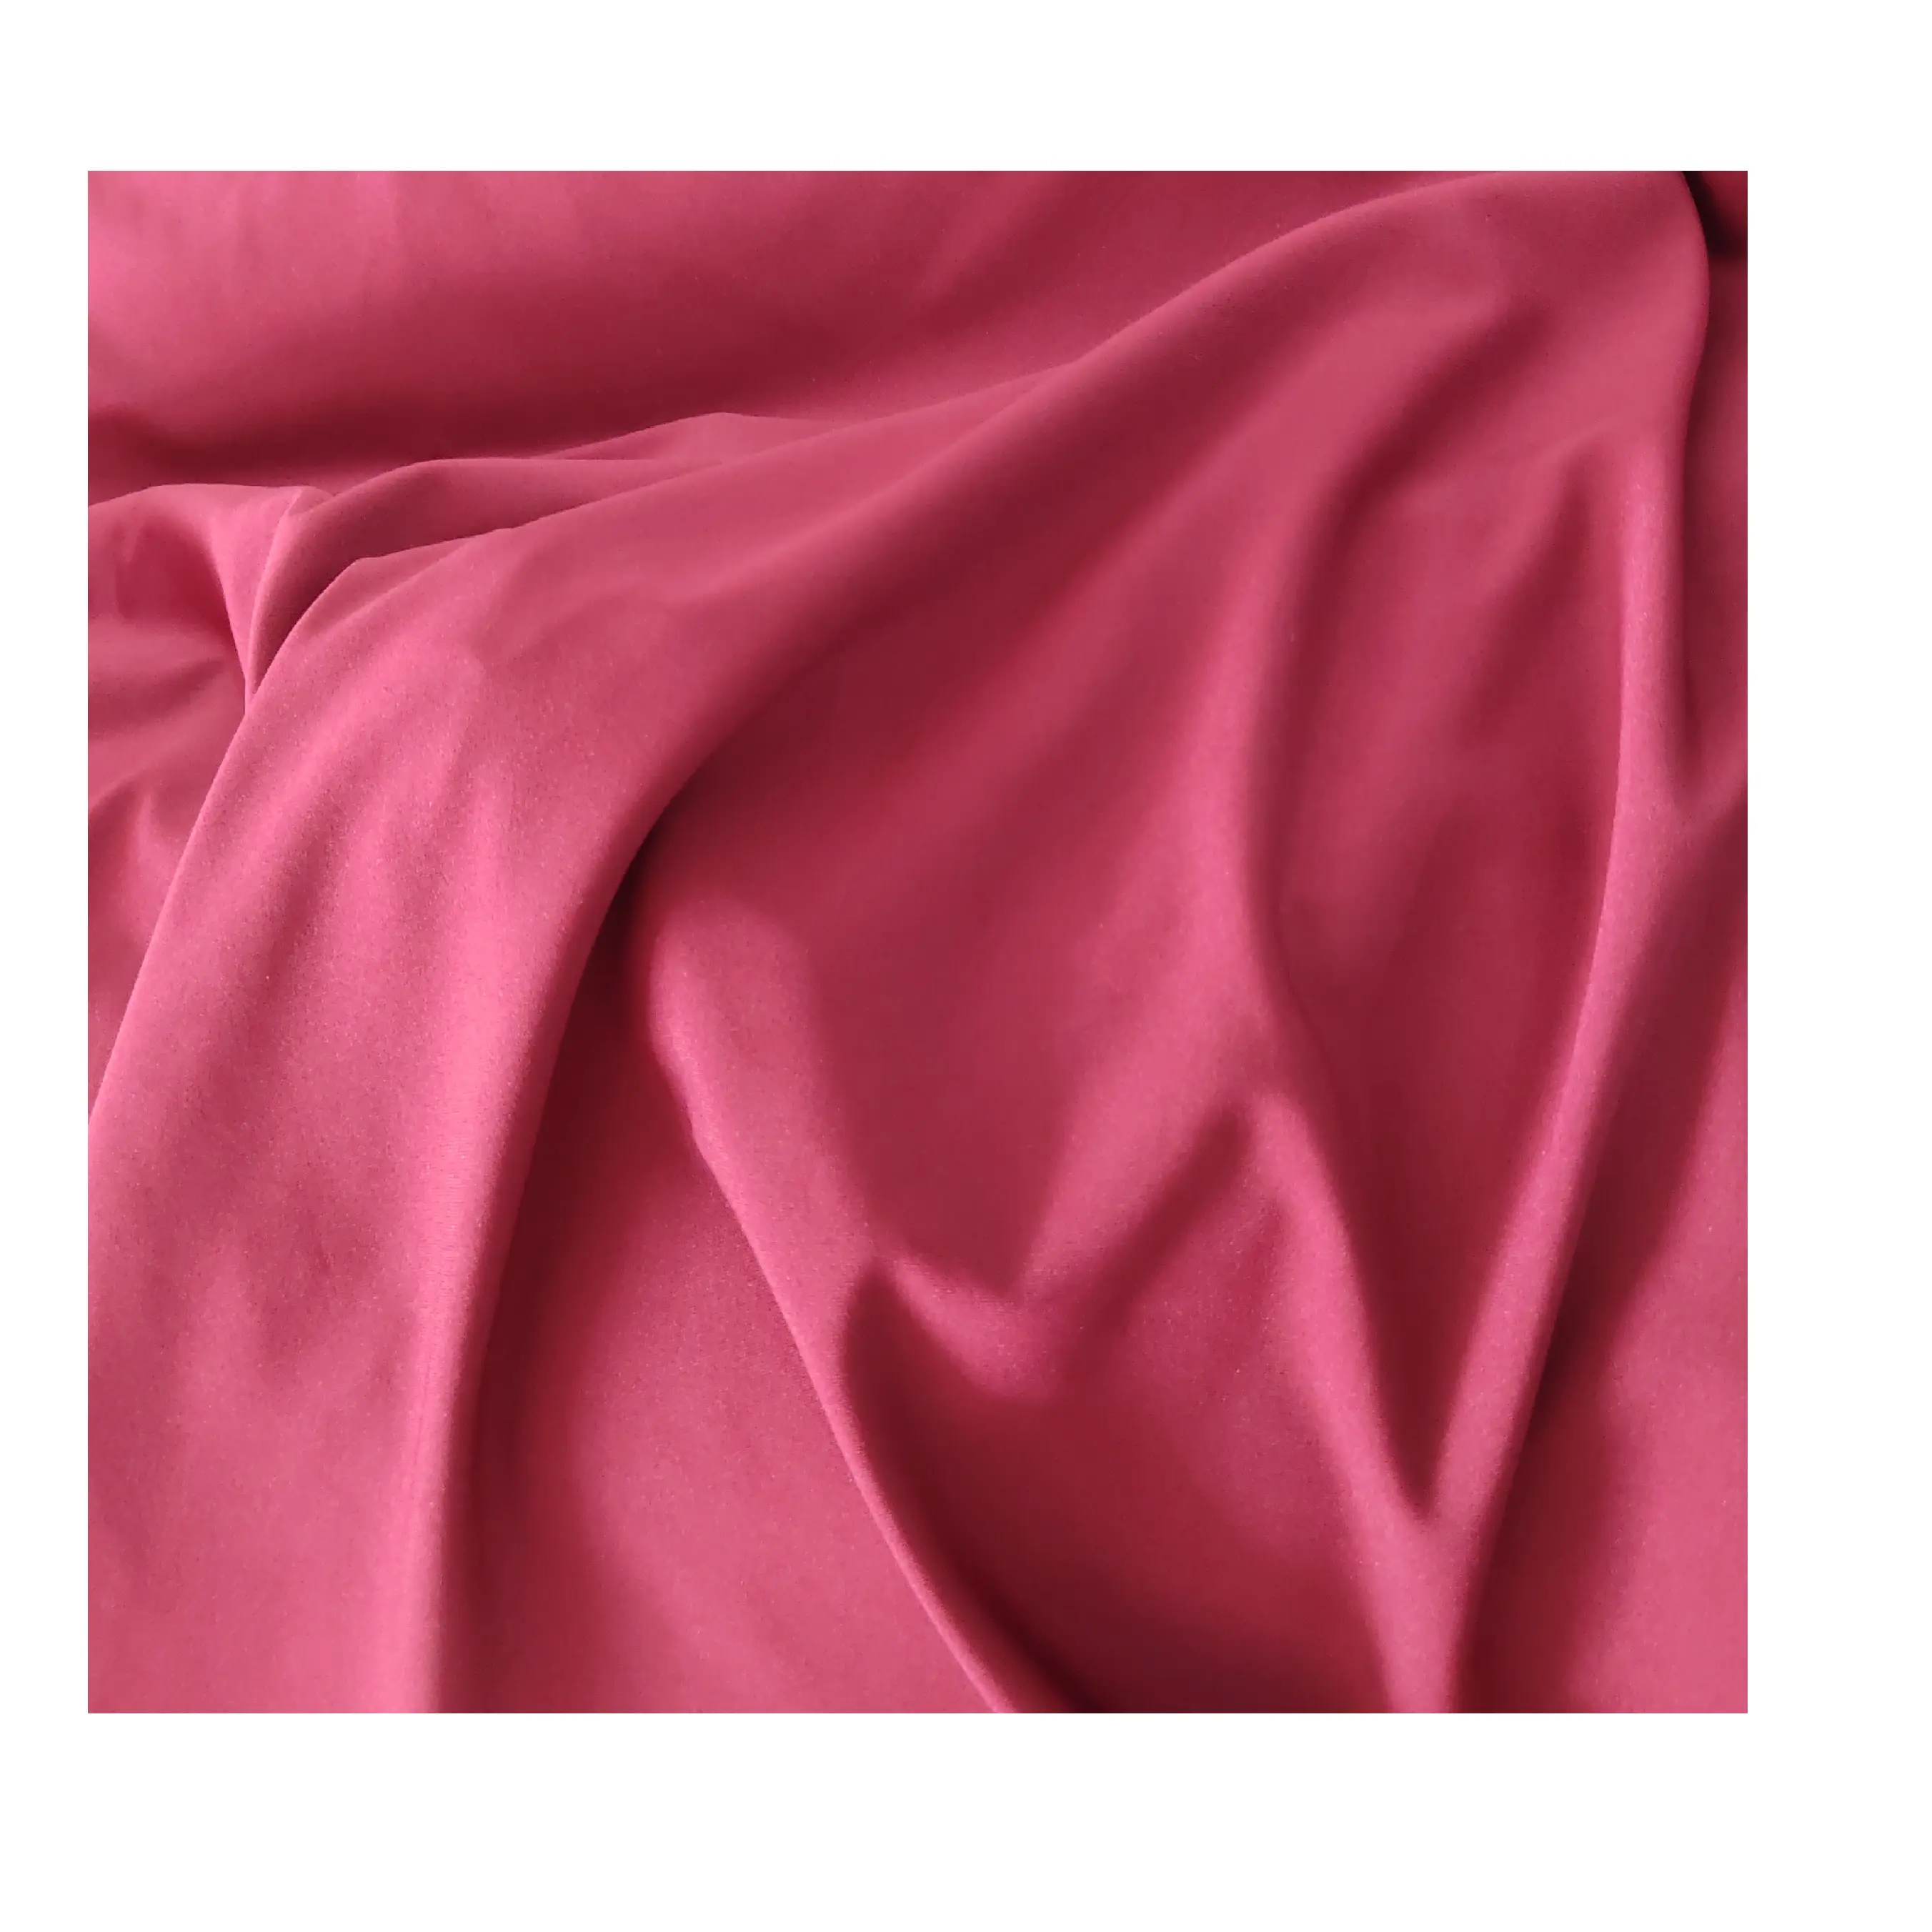 Premium Quality 100% Polyester Lycra Fabric Breathable Material Available with Multiple Colors For Export Sale